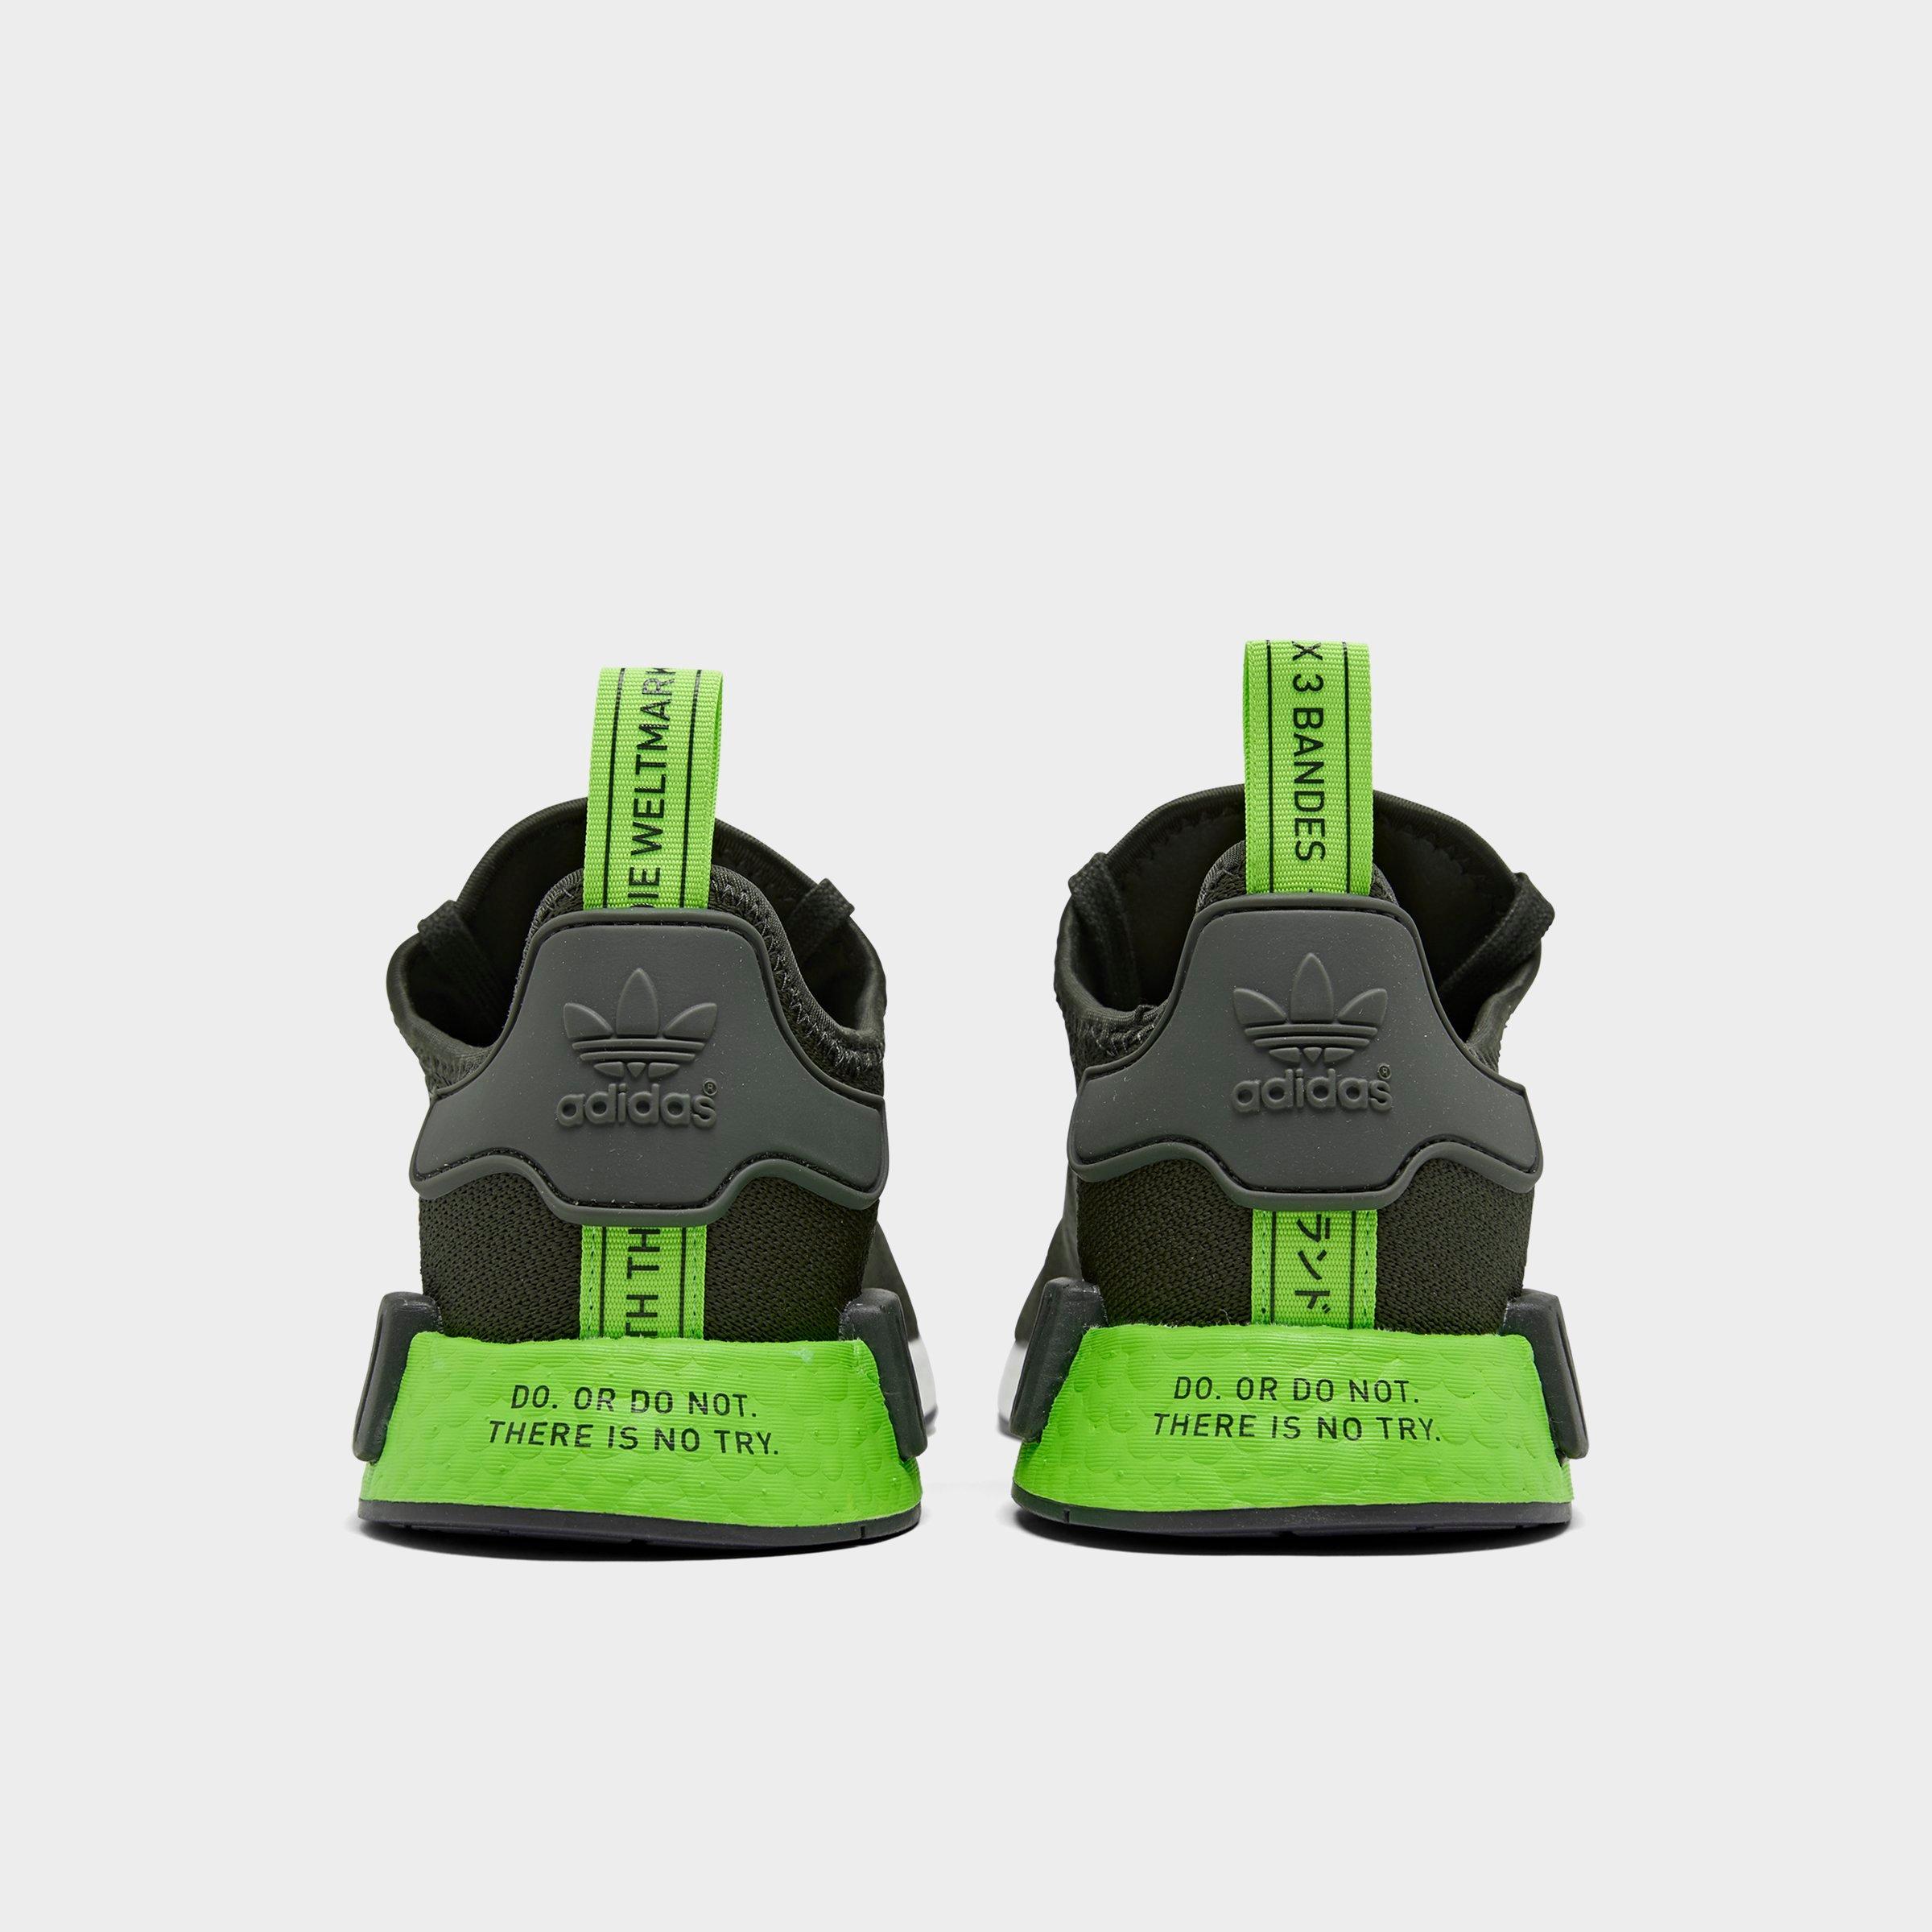 adidas NMD XR1 Lifestyle Shoes Boost adidas singapore